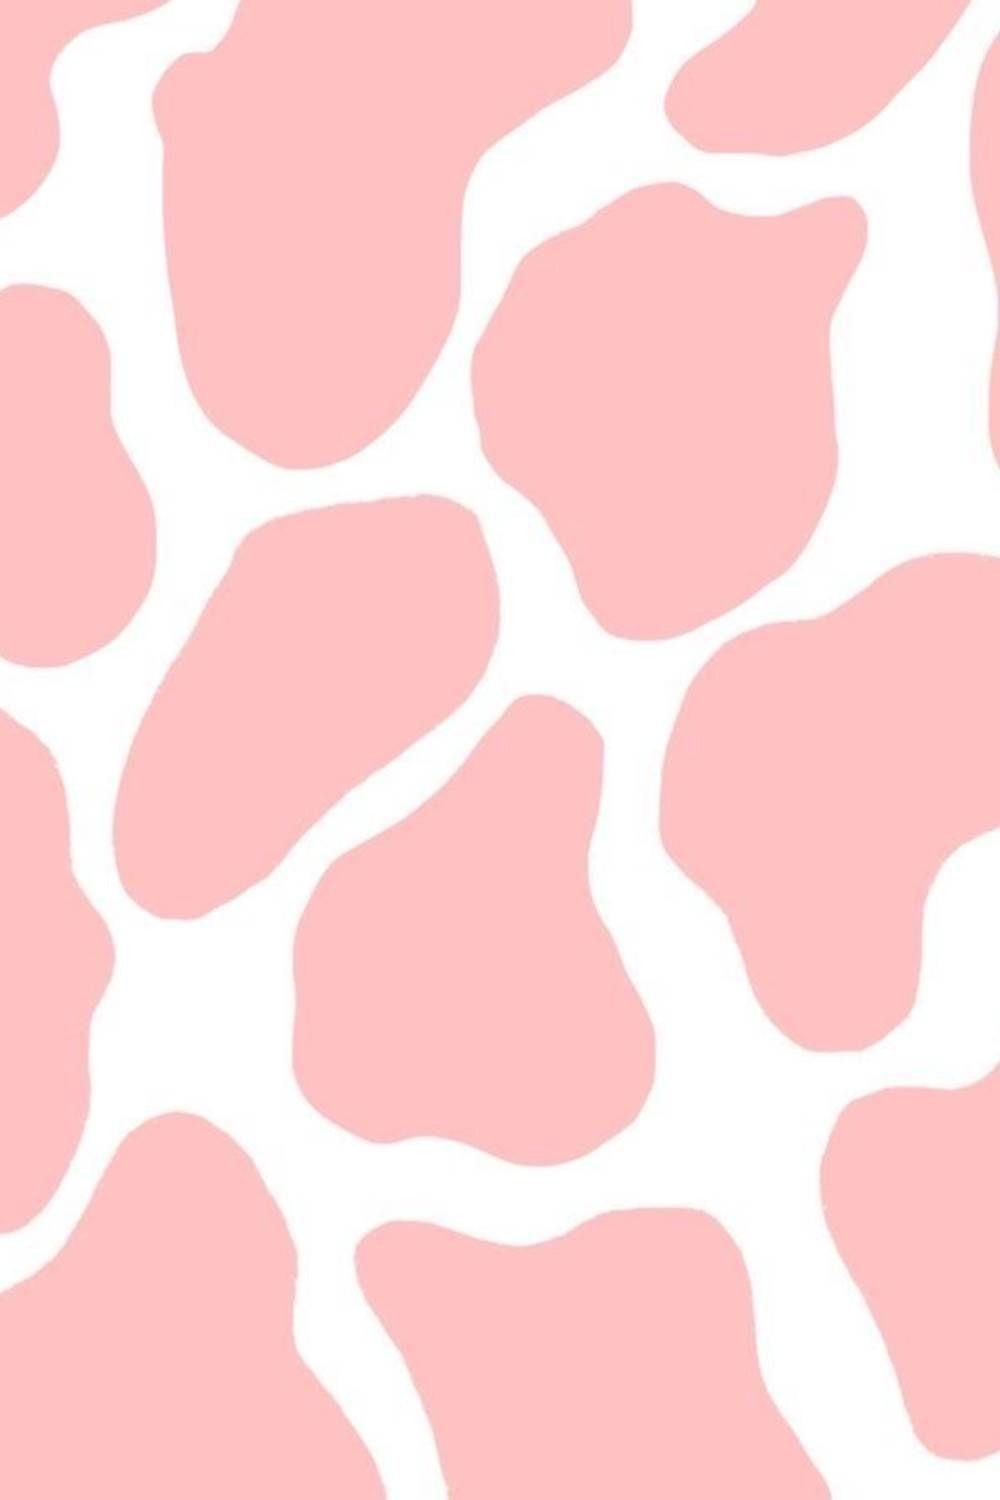 Bright Cute Leopard Print Fashion Girly Style Pink White Background  Wallpaper Image For Free Download  Pngtree